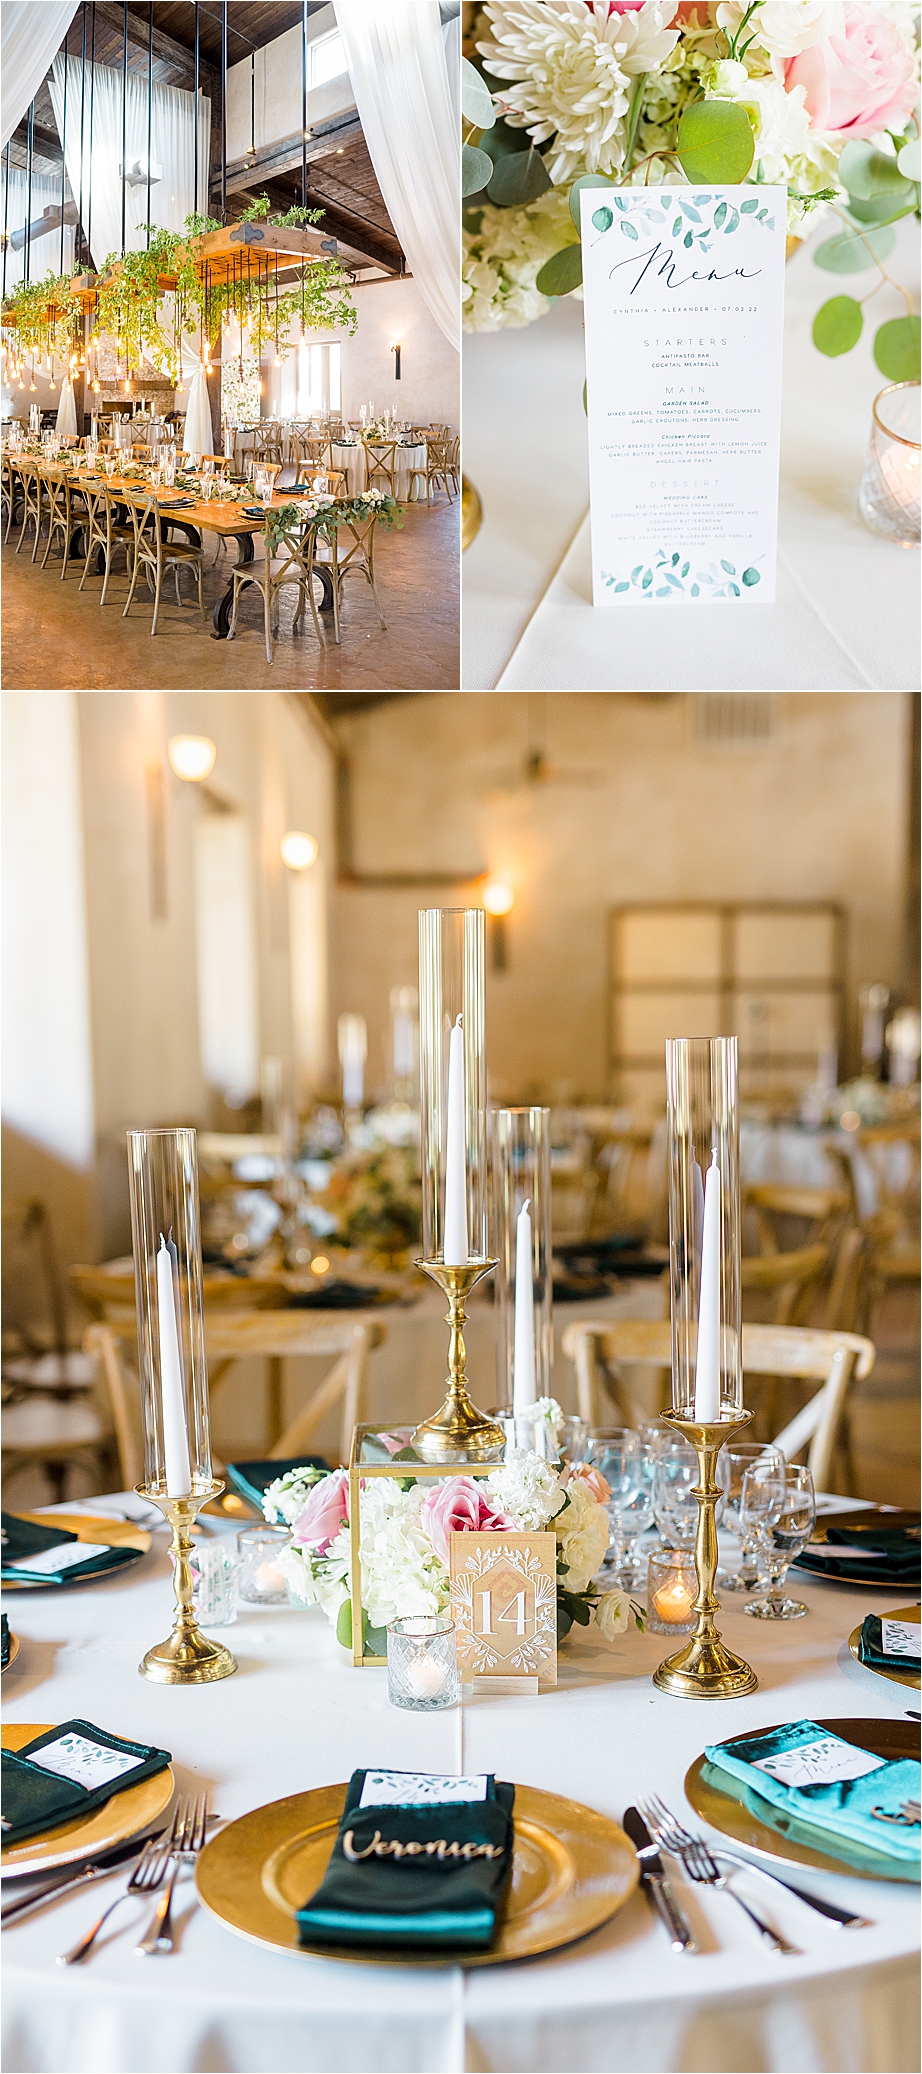 Edison bulbs, beautifully decorated table and ready for guests to enter on a wedding day at Lost Mission near San Antonio, Texas 